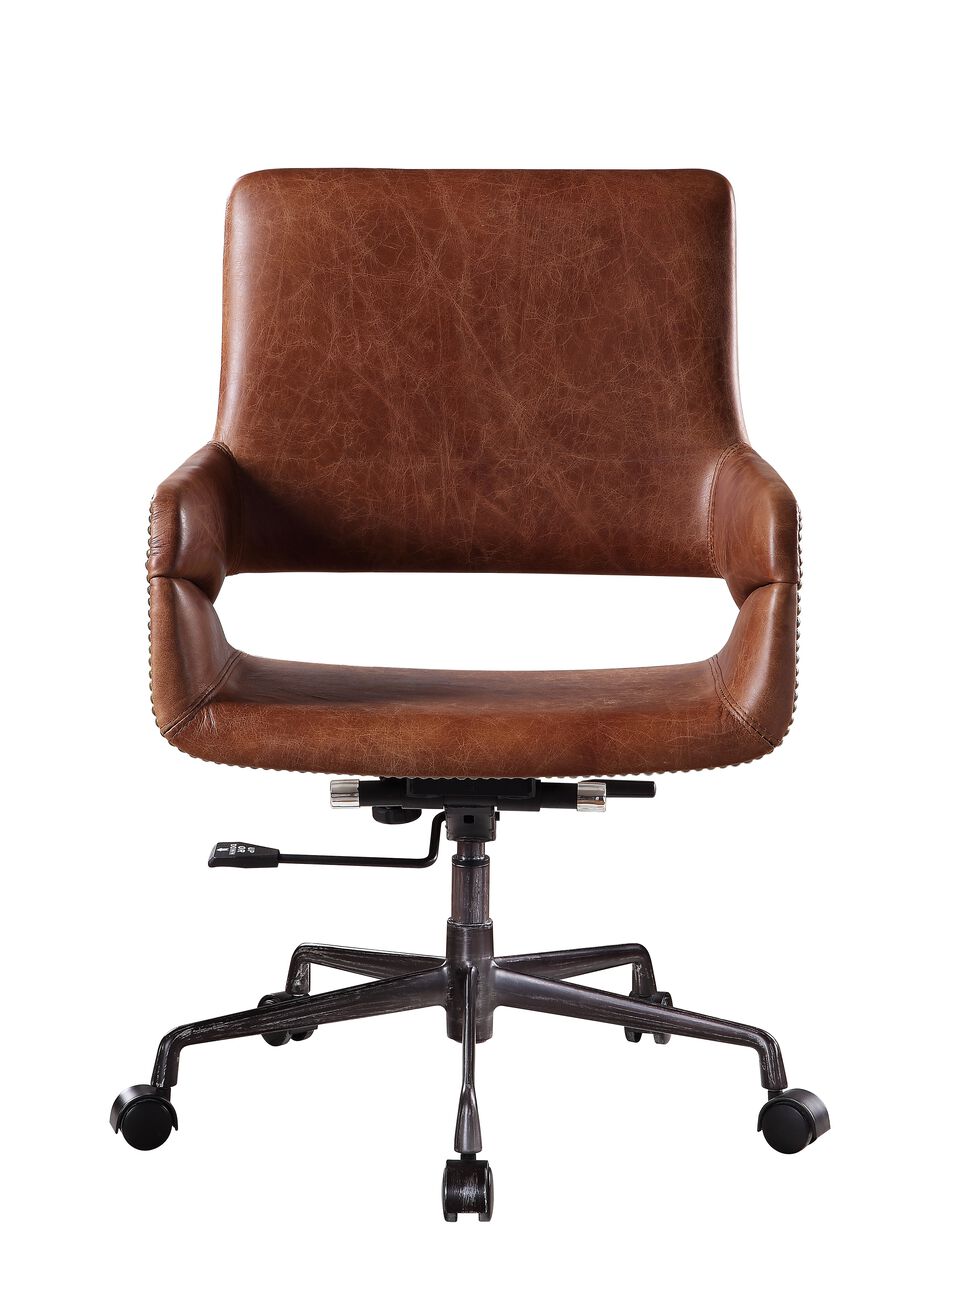 Faux Leather Upholstered Wooden Office Chair with Lift Mechanism,Brown